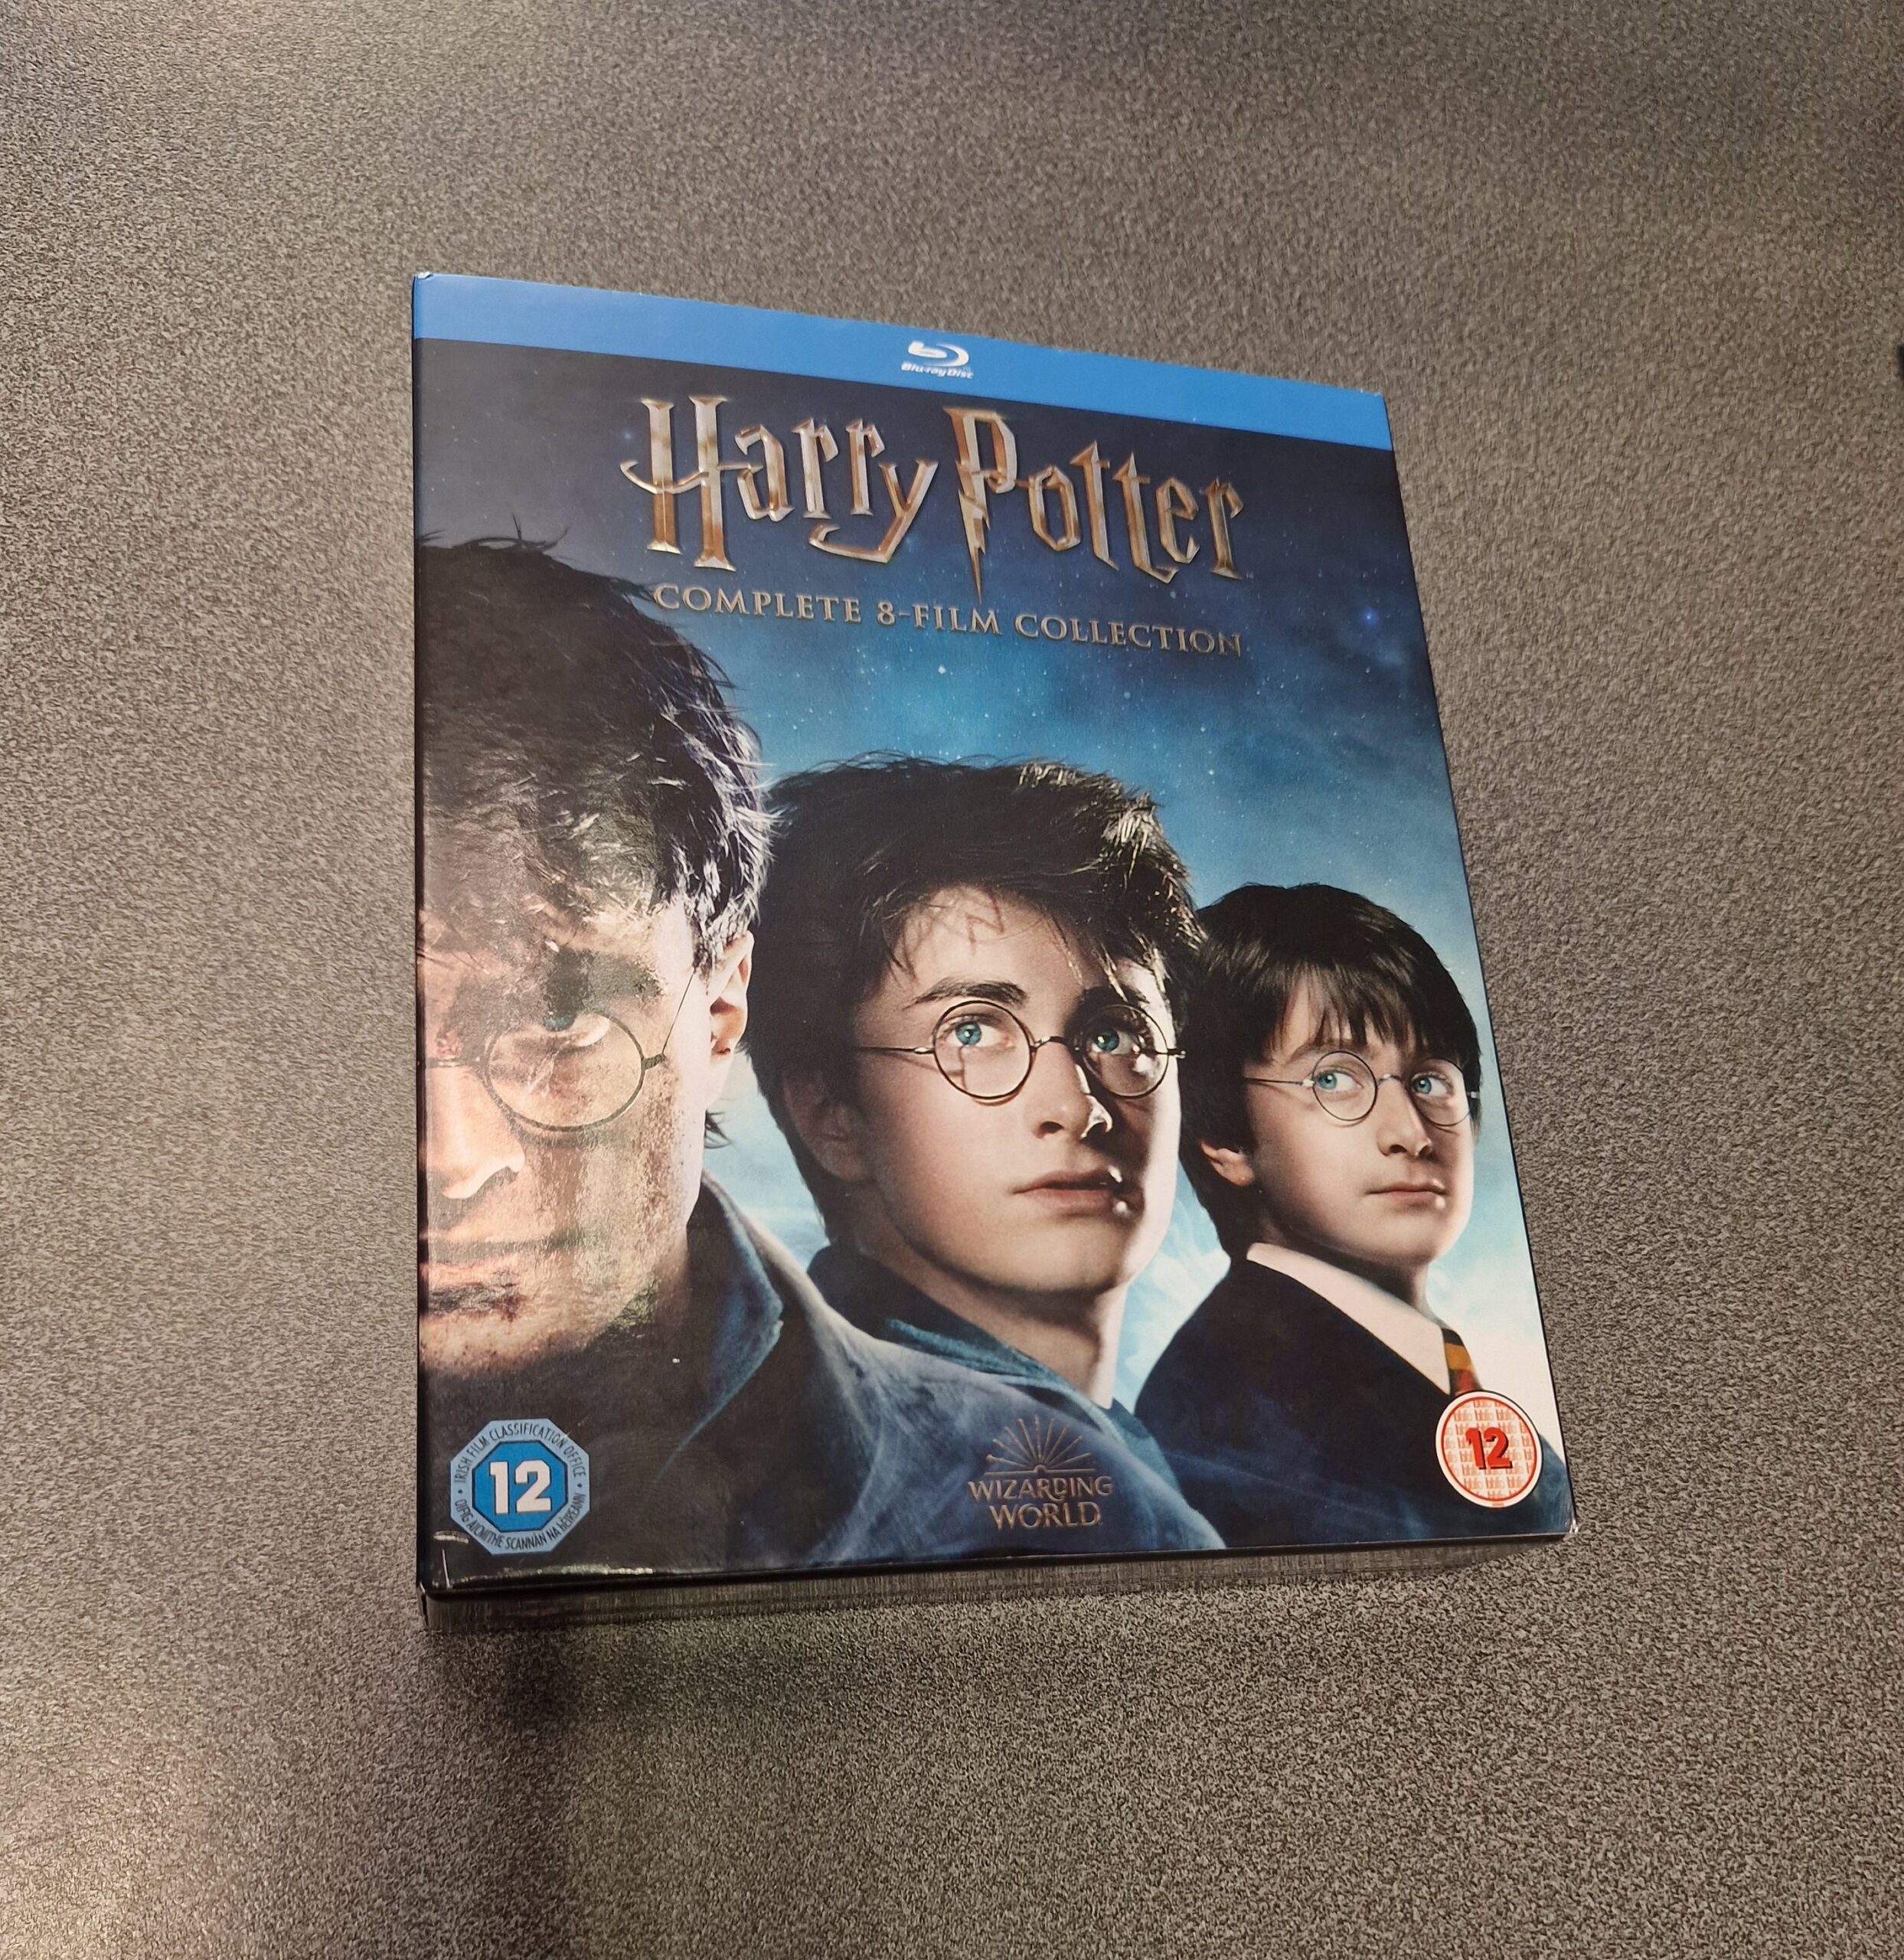 Harry Potter 4 Goblet of Fire DVD Disk Only ~ No Art, Case or Tracking